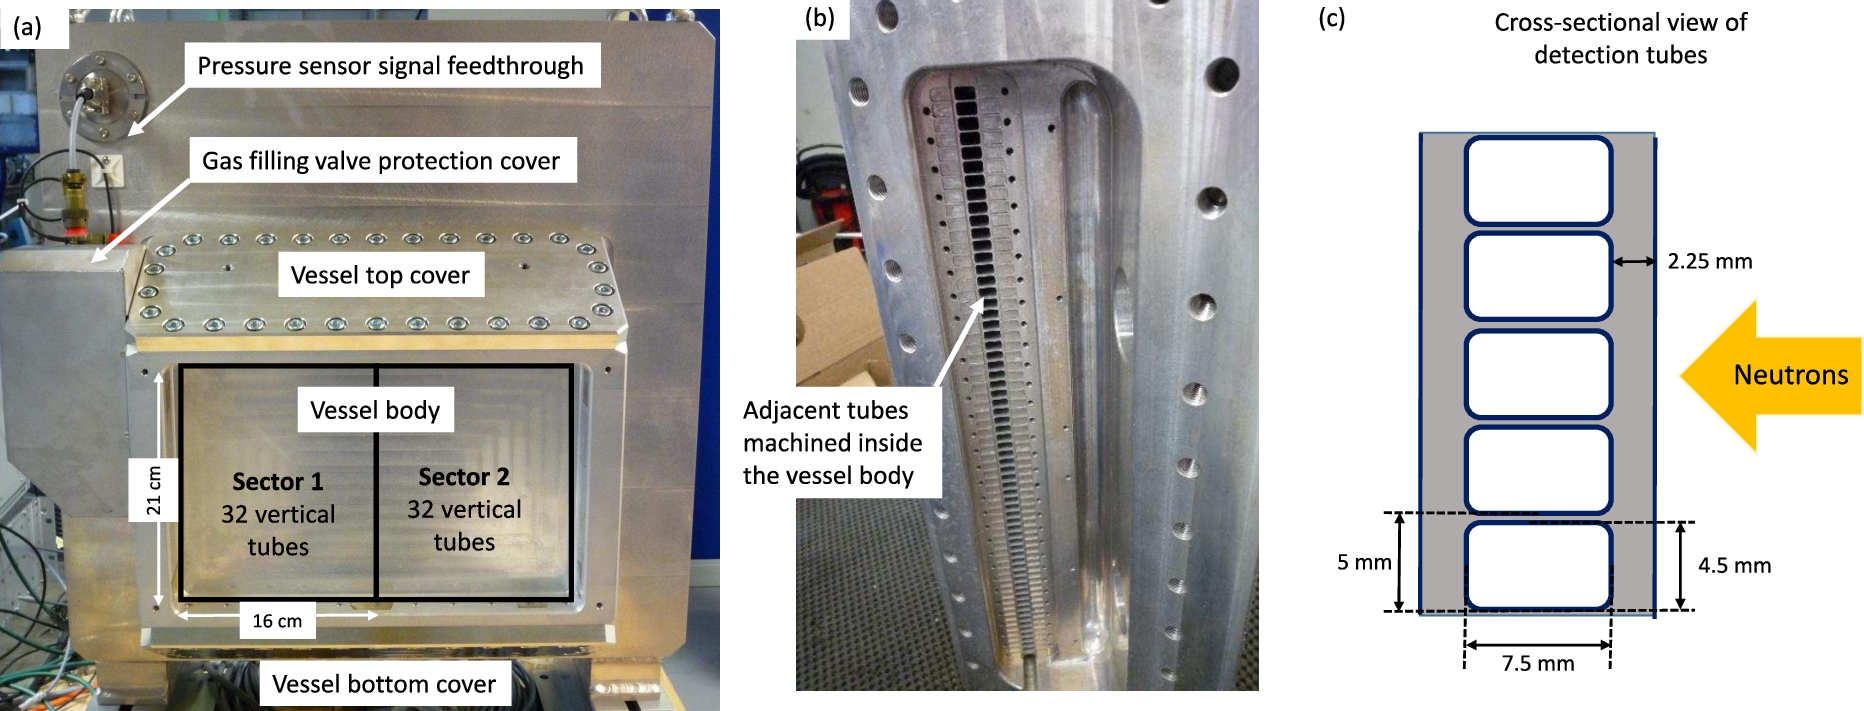 (a) Photograph of the detector head showing the vessel body (b) adjacent tubes machined inside the vessel body (c) cross-sectional view of the vessel body showing the dimensions of the tubes.